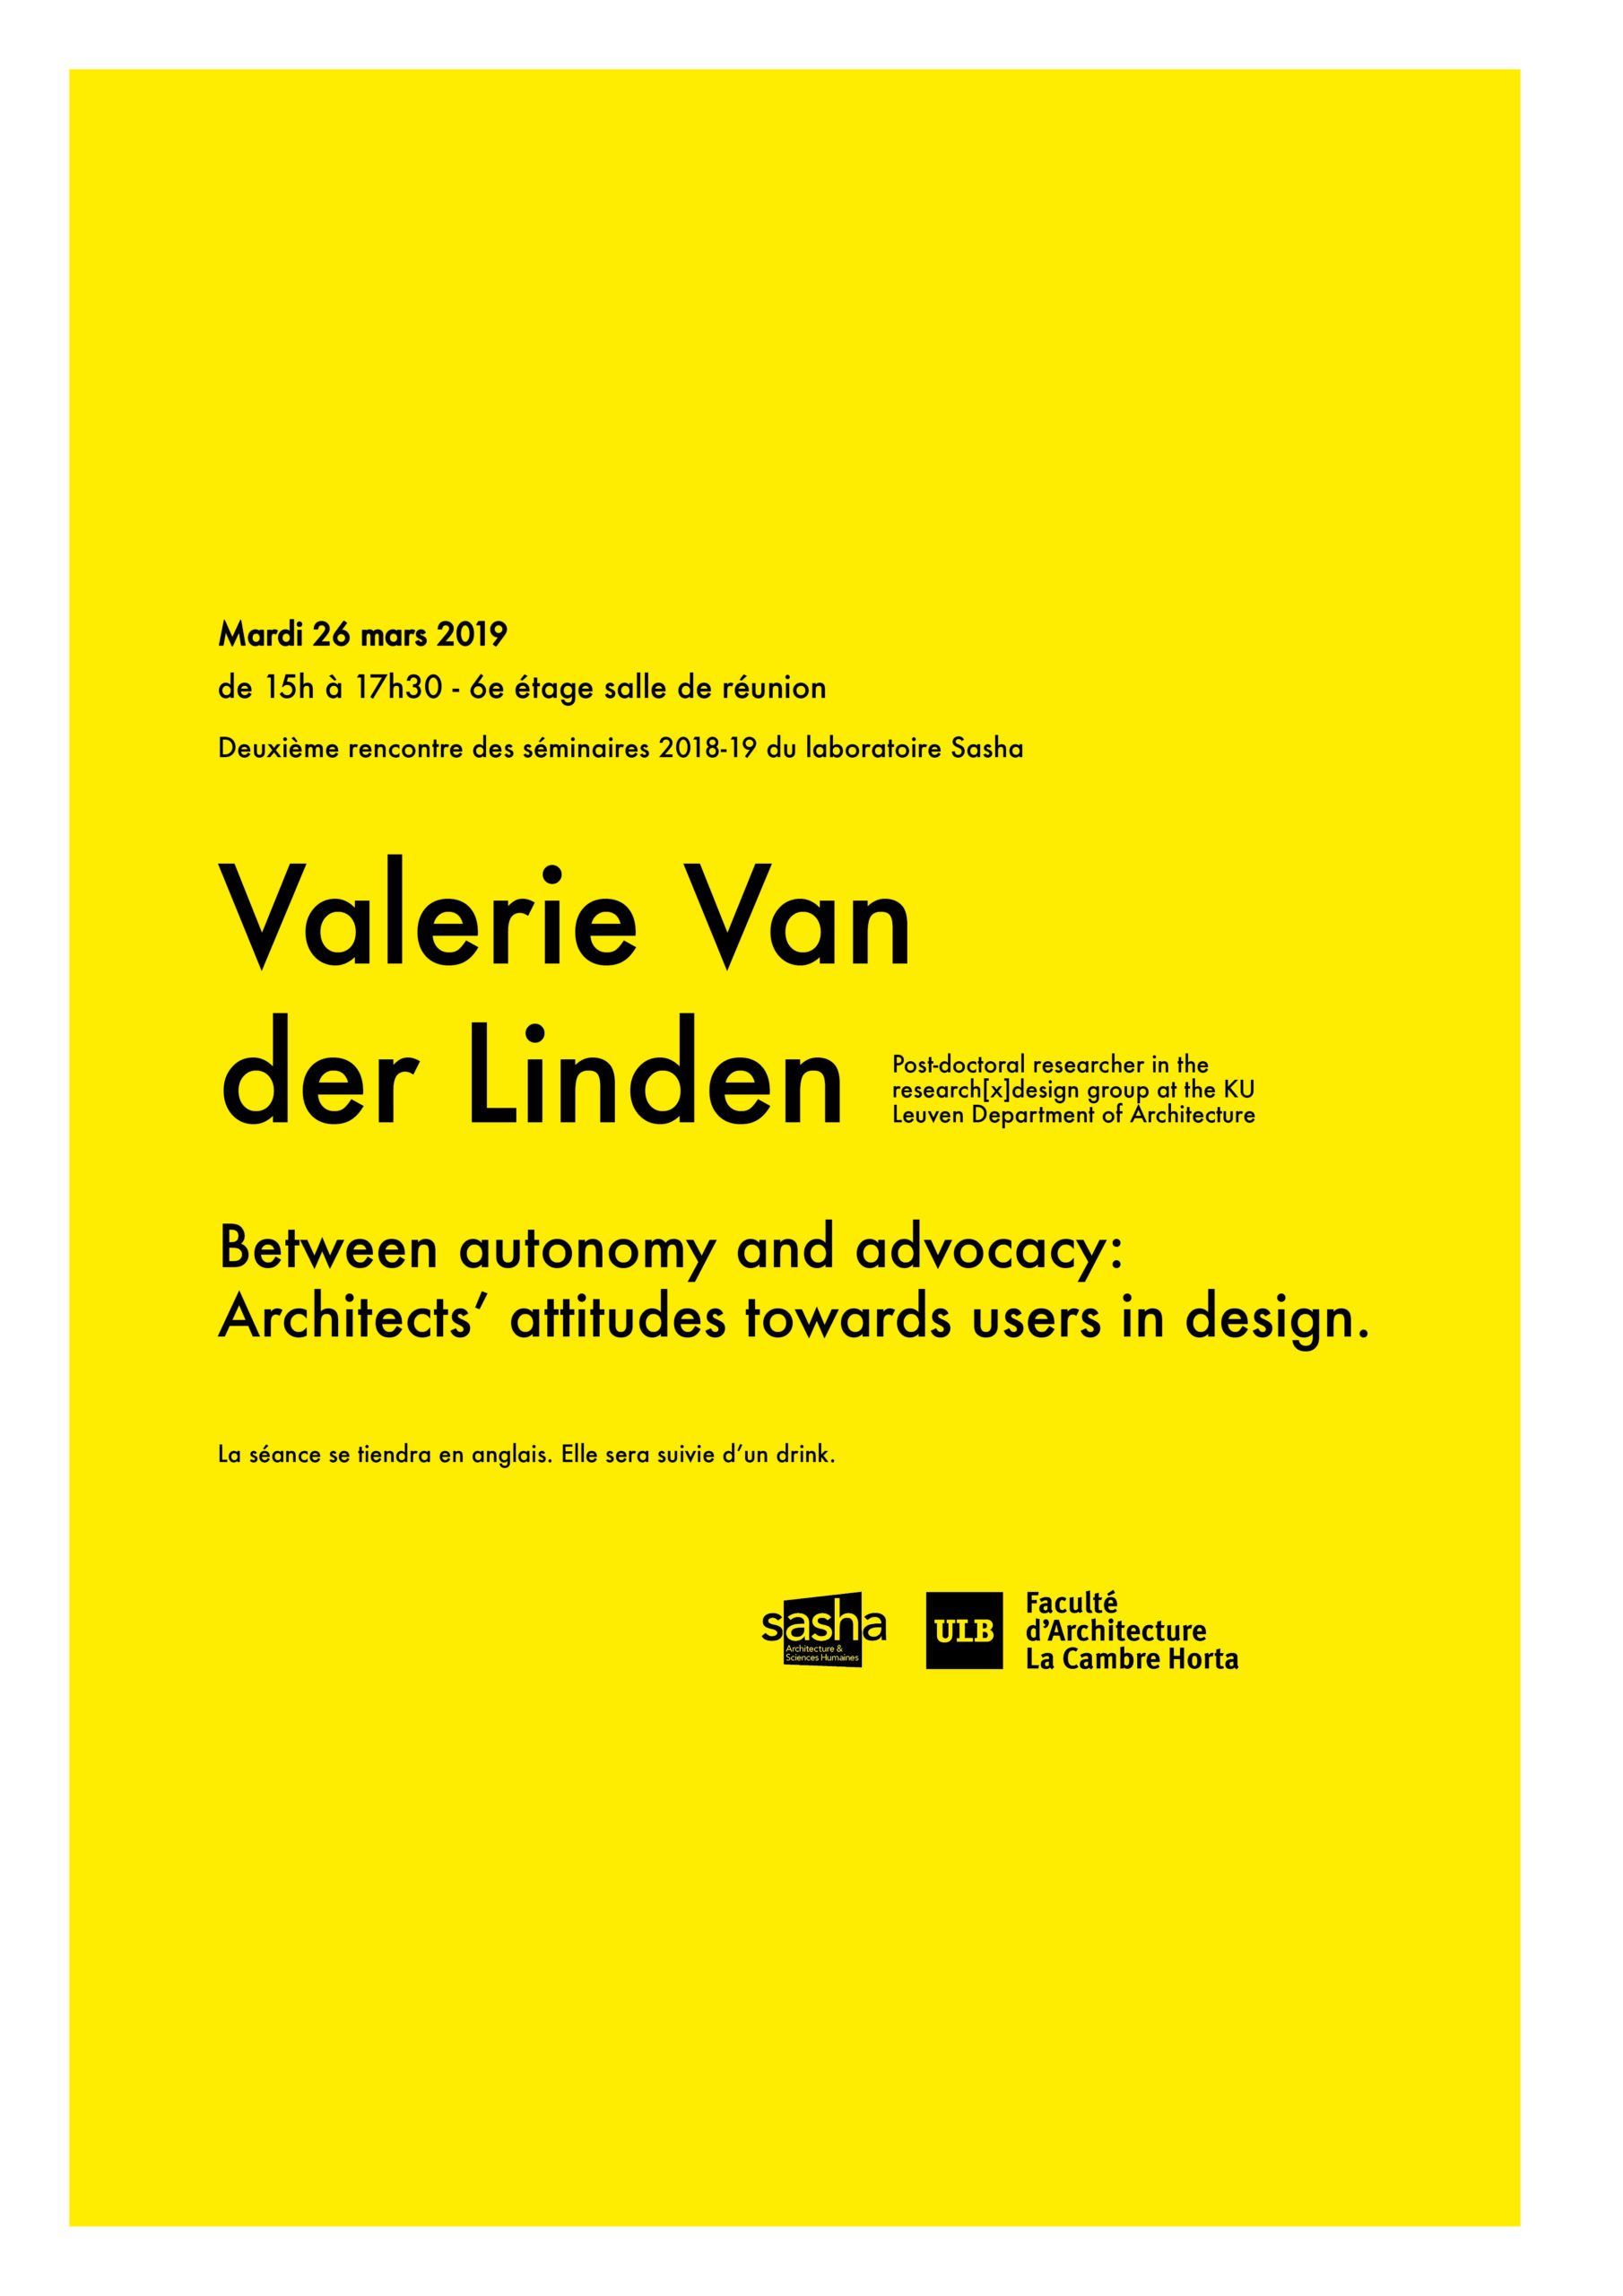 Between autonomy and advocacy: Architects’ attitudes towards users in design.